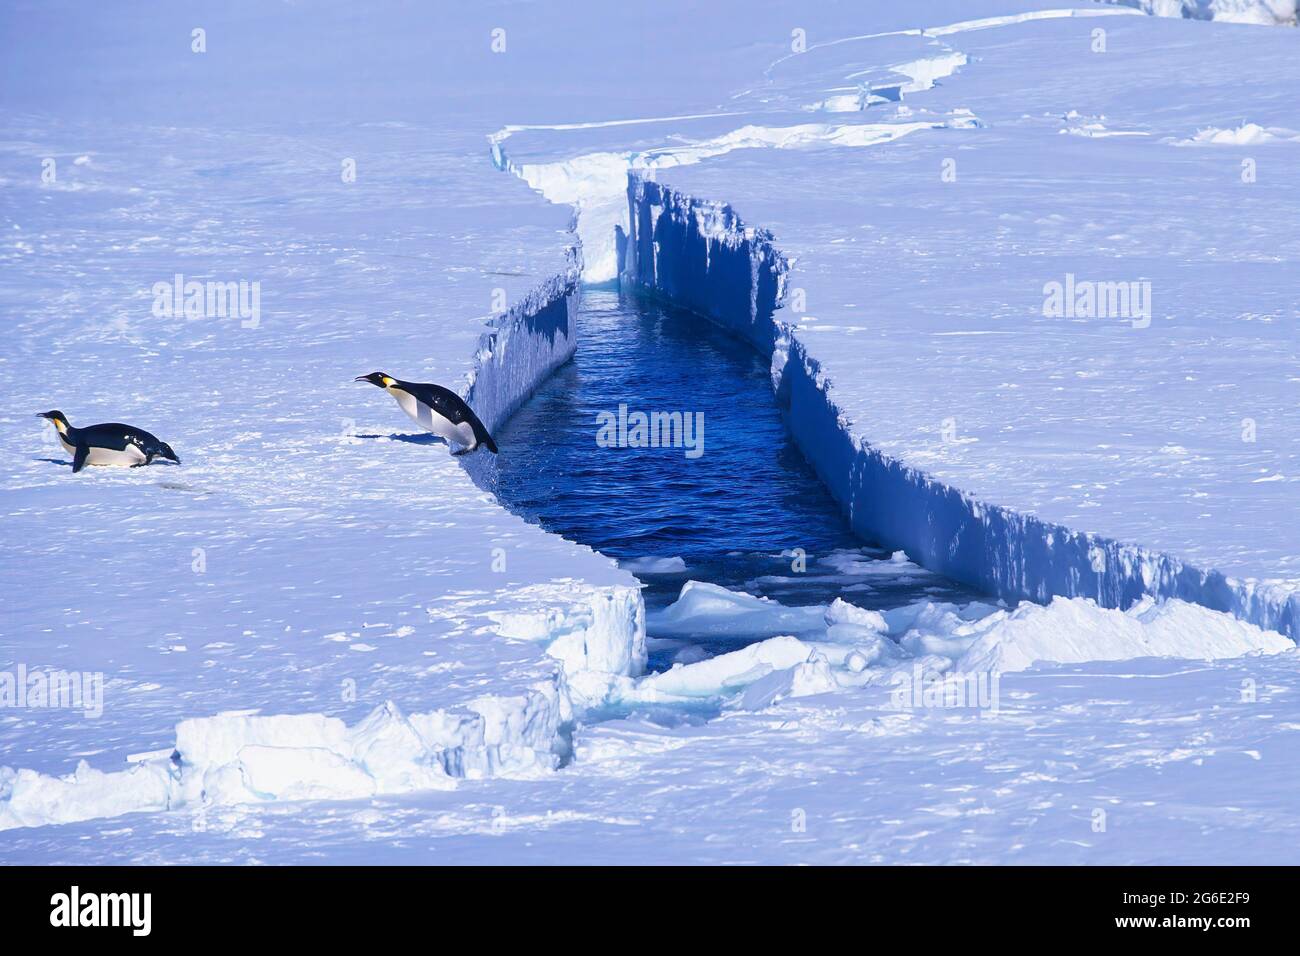 Emperor Penguin jumping out of the water, Riiser-Larsen Ice Shelf, Queen Maud Land Coast, Weddell Sea, Antarctica Stock Photo